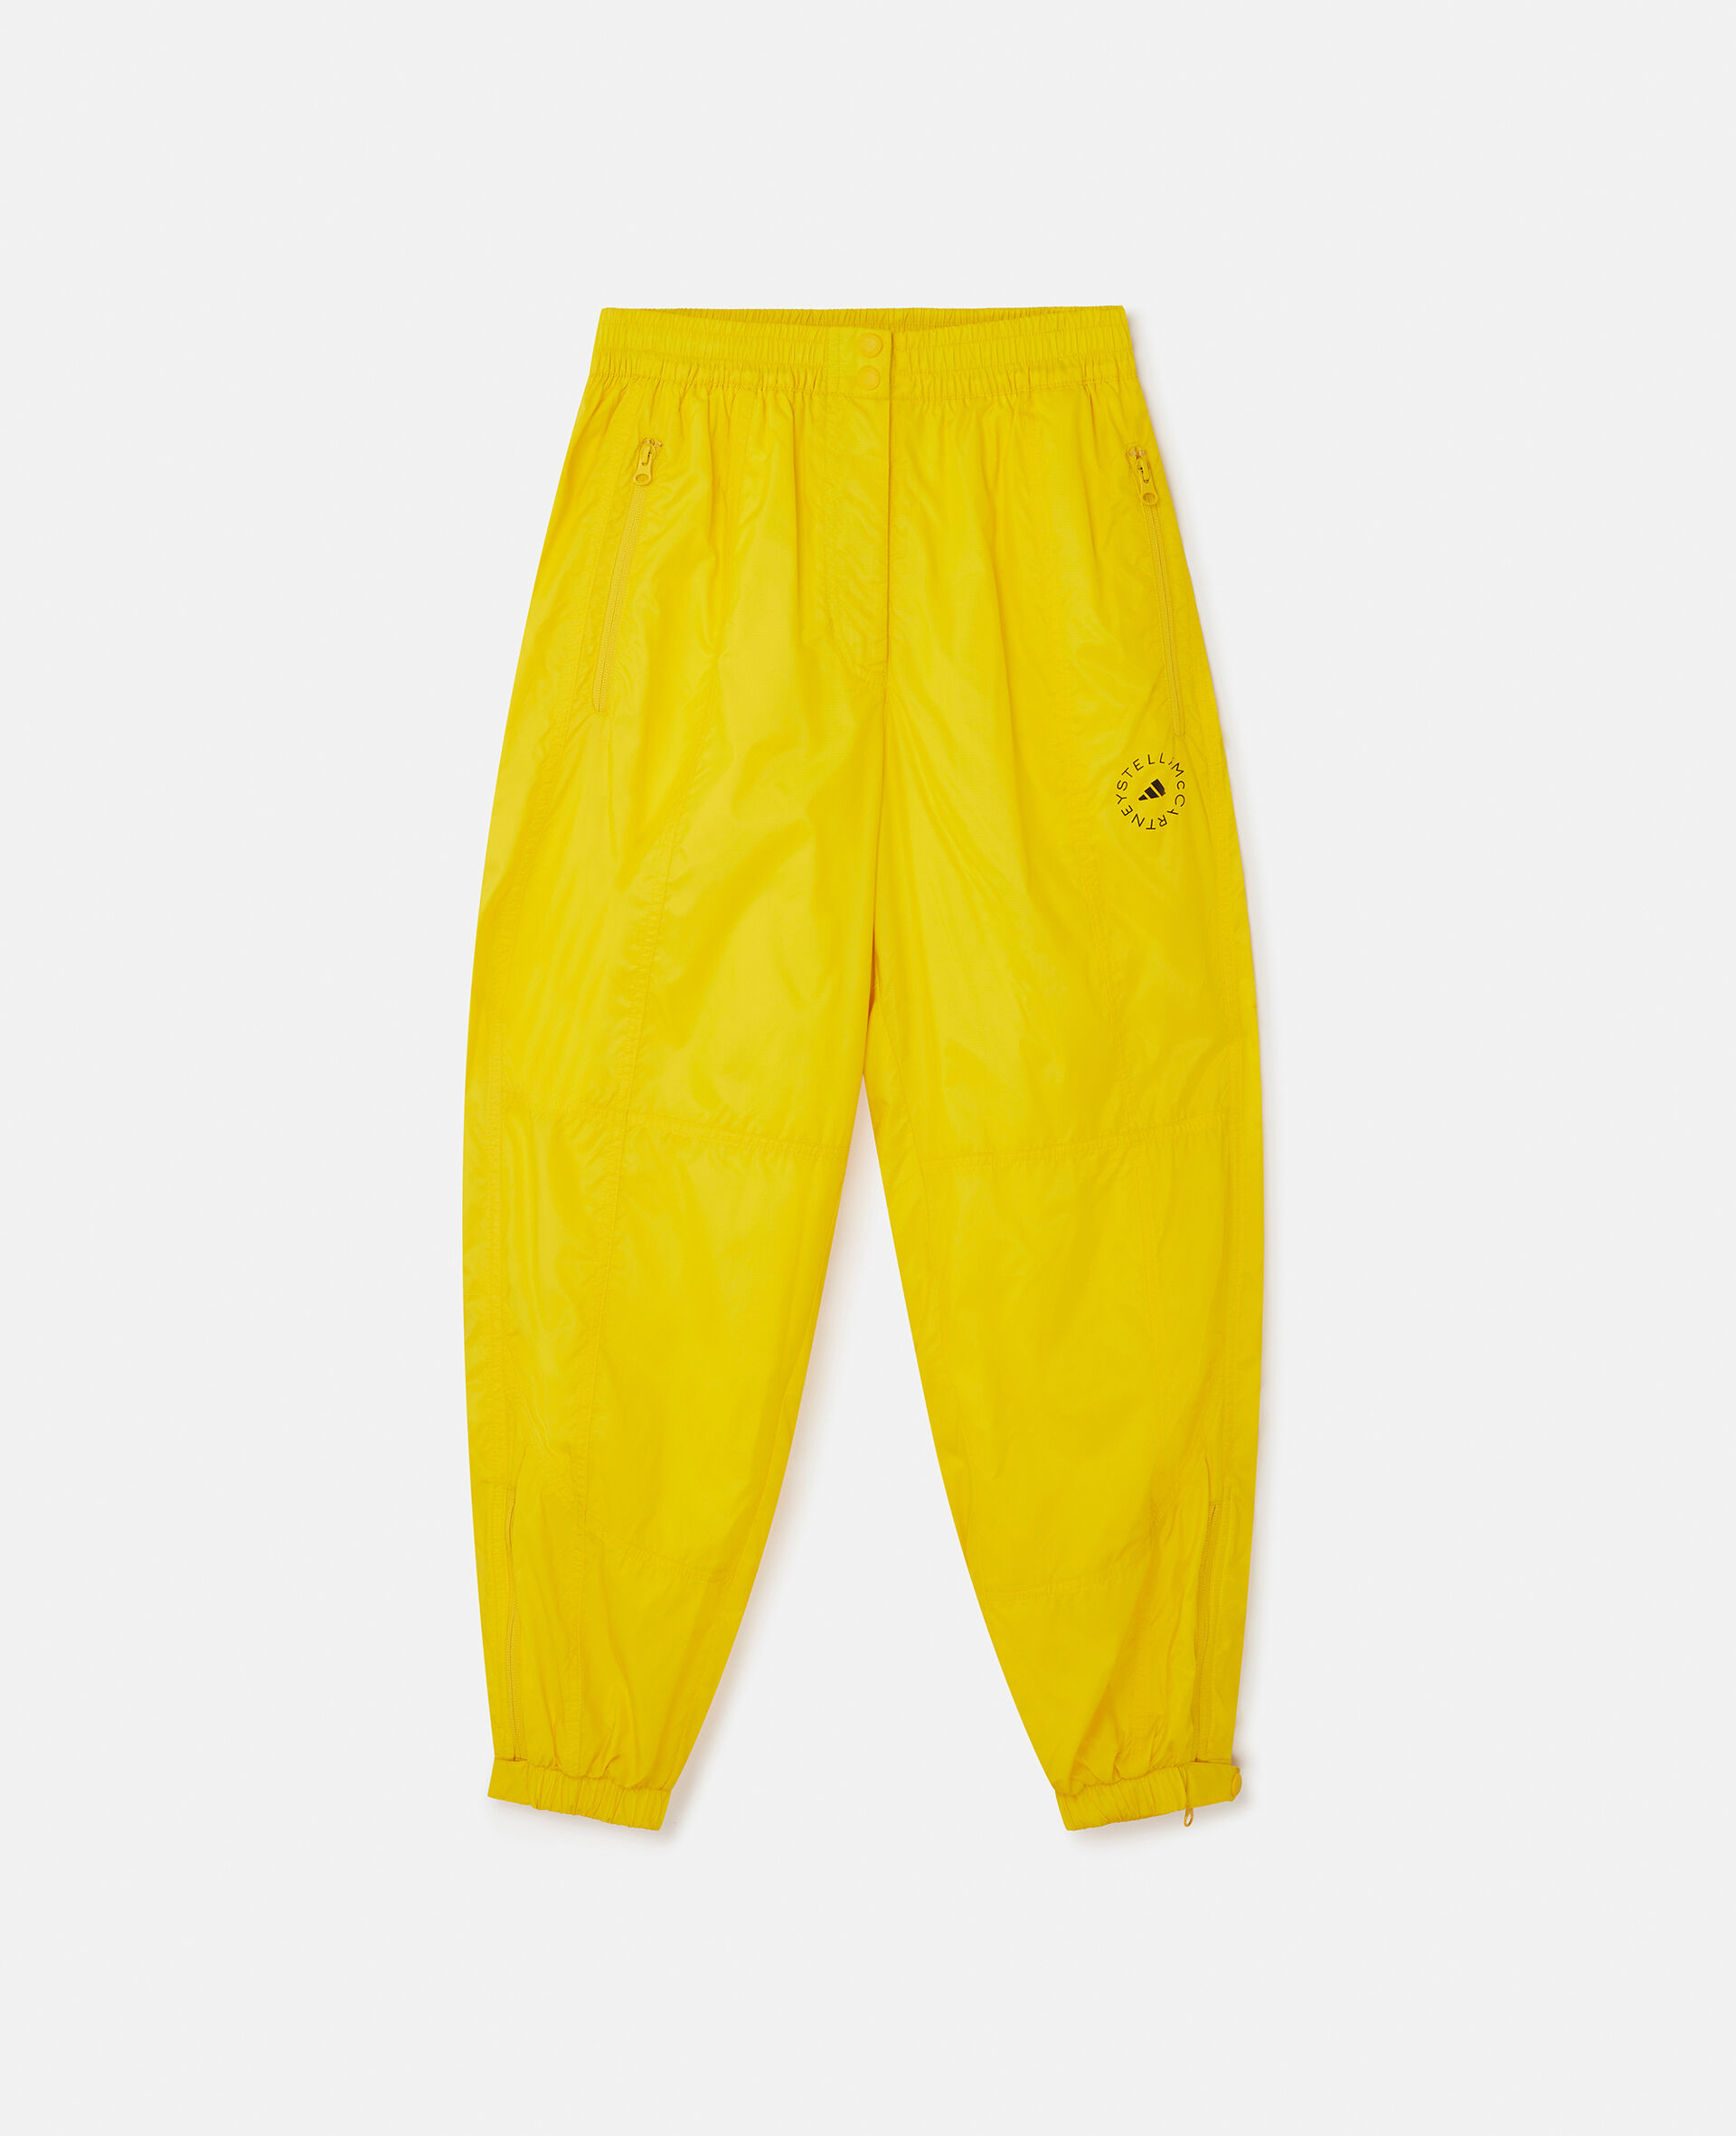 Woven Lined Trousers-Yellow-large